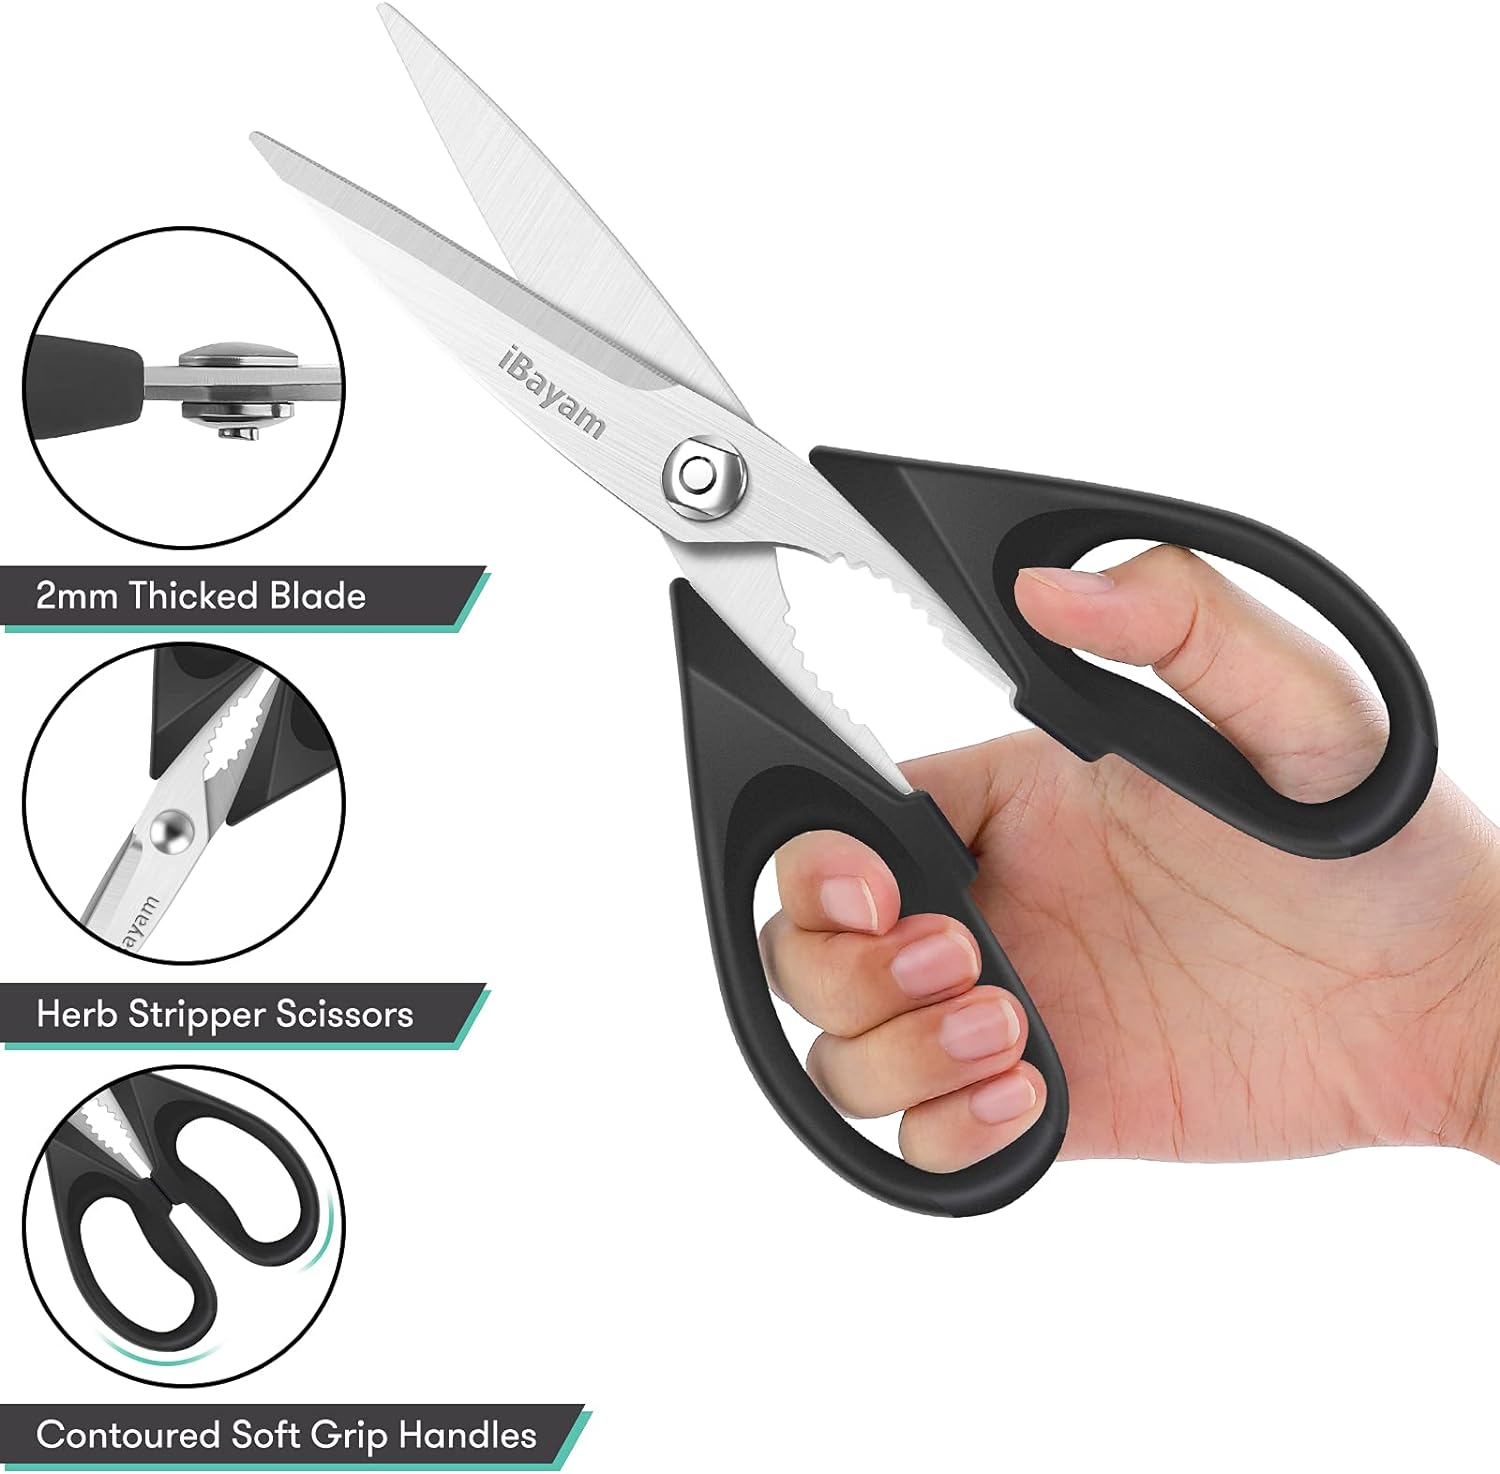 Wholesale prices with free shipping all over United States Kitchen Poultry Shears, iBayam Meat Scissors Heavy Duty Dishwasher Safe Food Cooking Shears All Purpose Stainless Steel Utility Scissors, 2-Pack, Black, Aqua Sky - Steven Deals